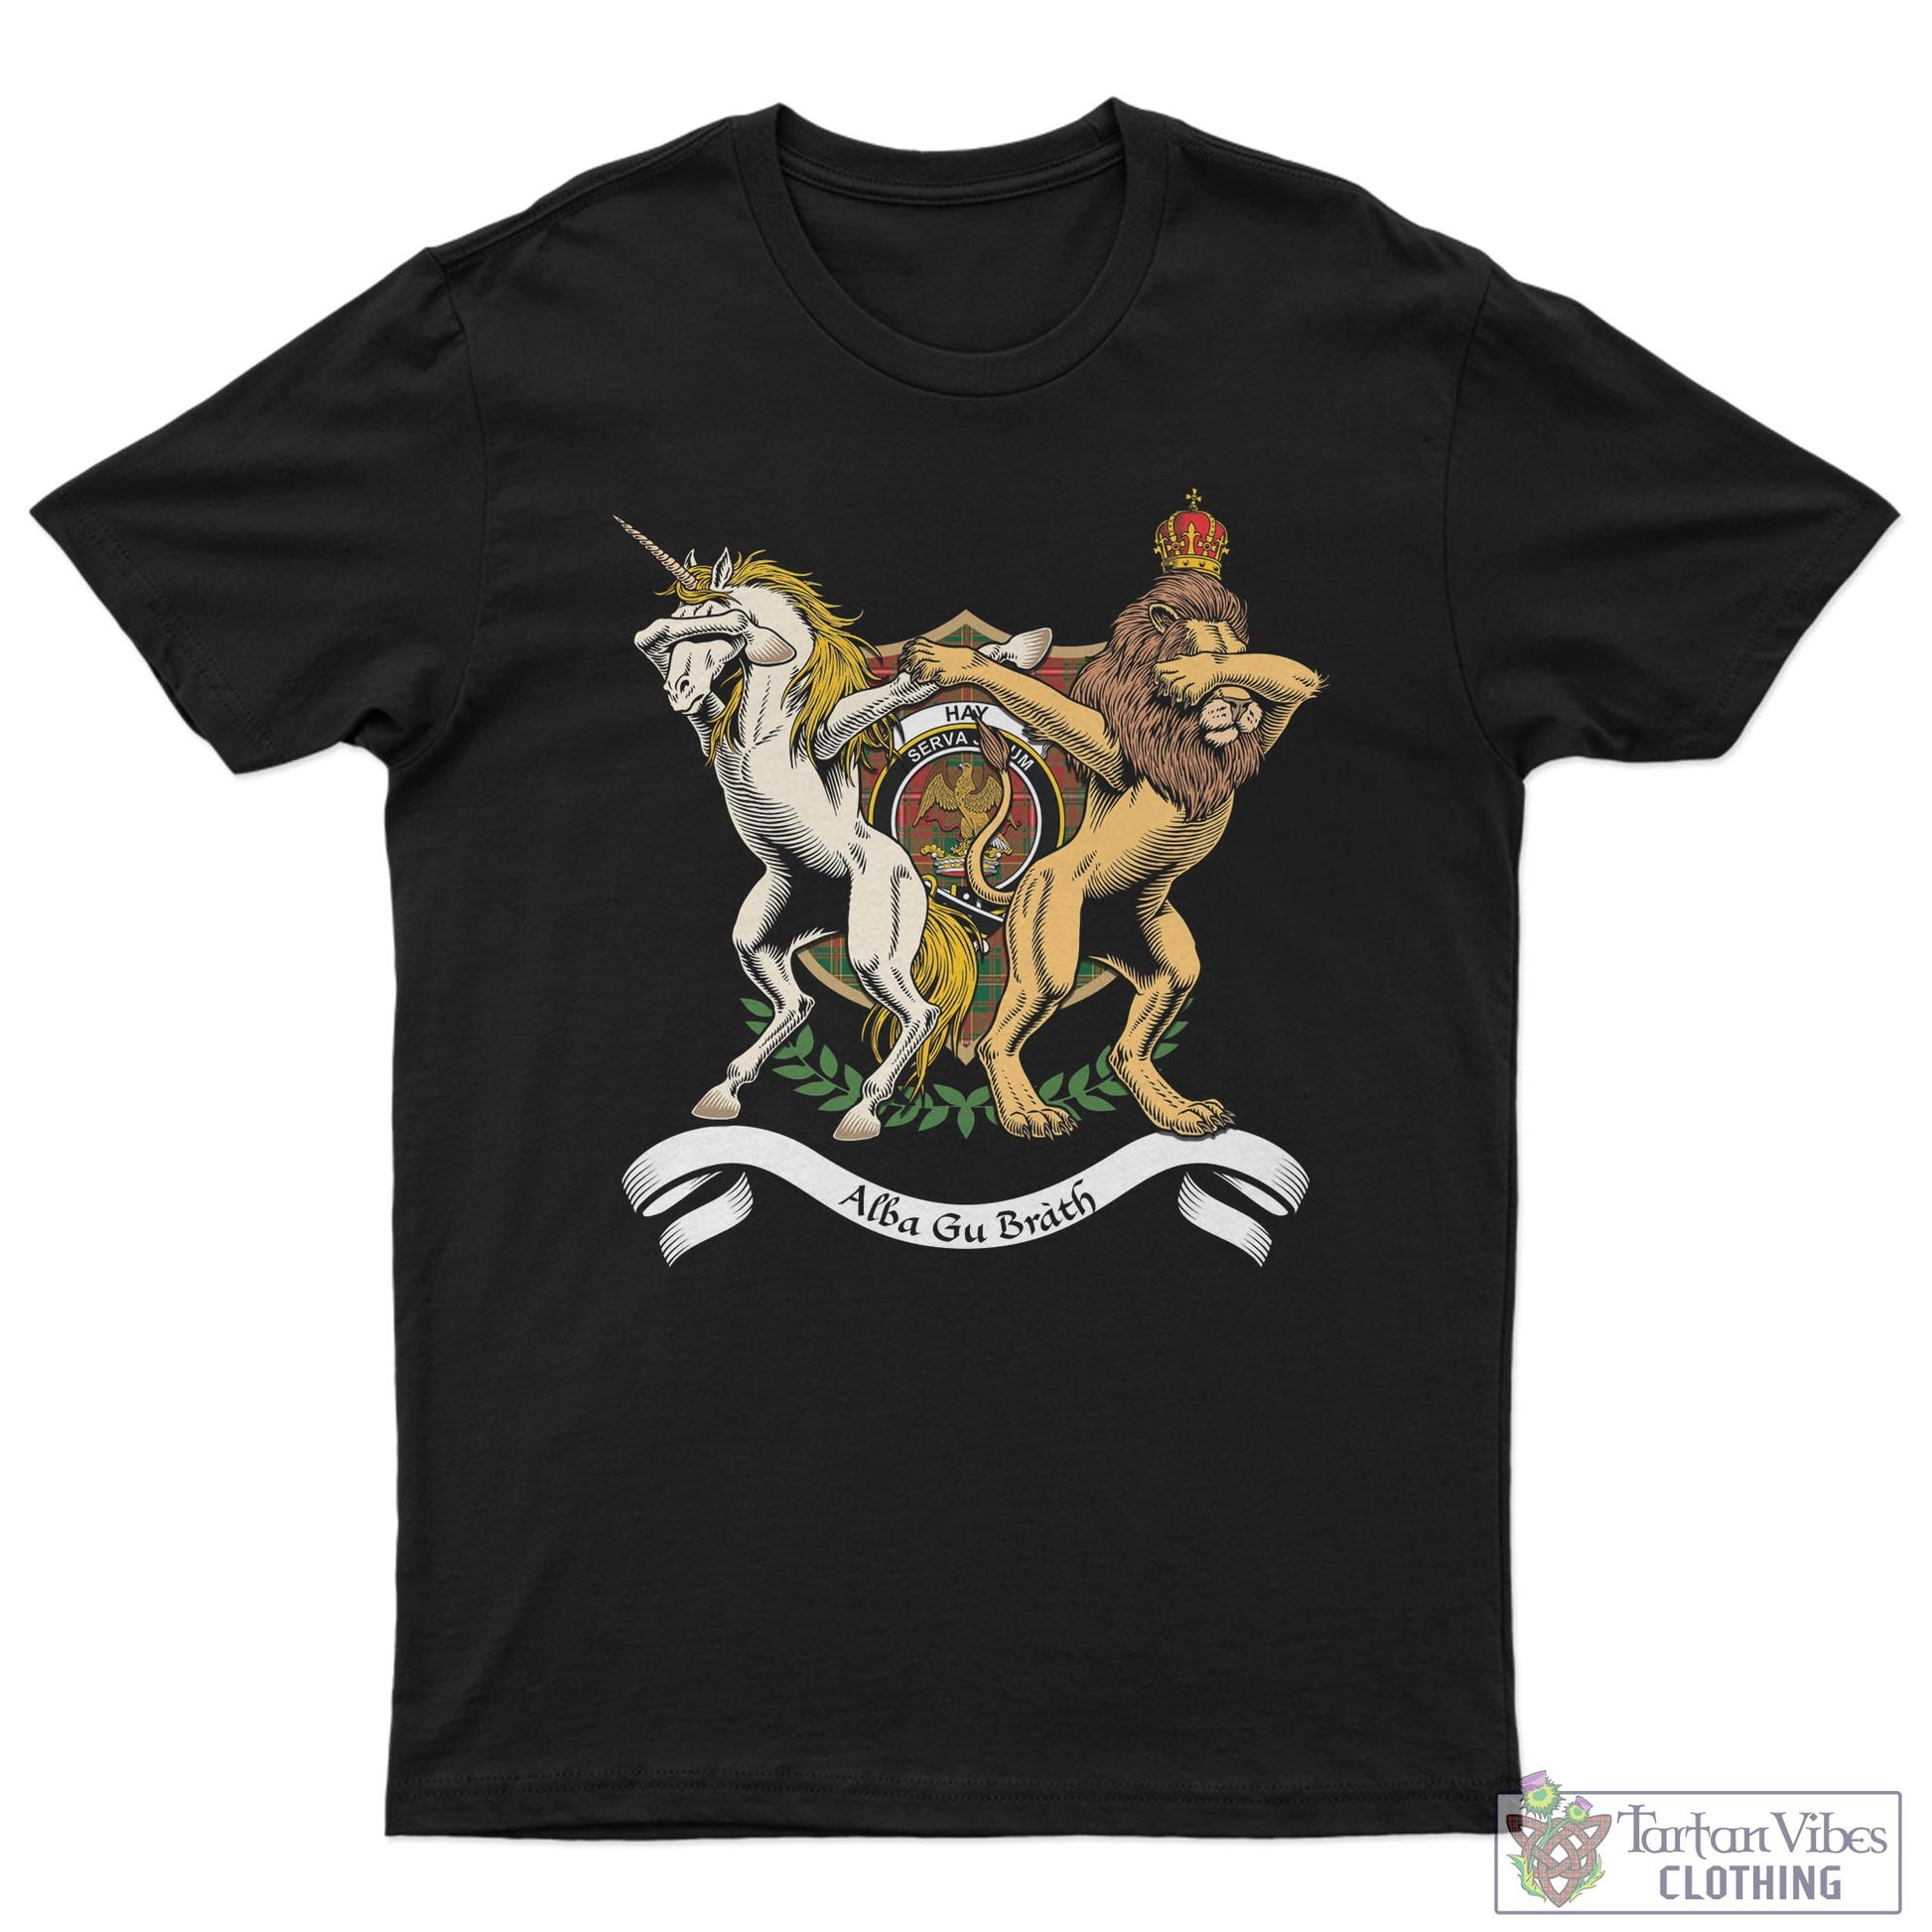 Tartan Vibes Clothing Hay Ancient Family Crest Cotton Men's T-Shirt with Scotland Royal Coat Of Arm Funny Style